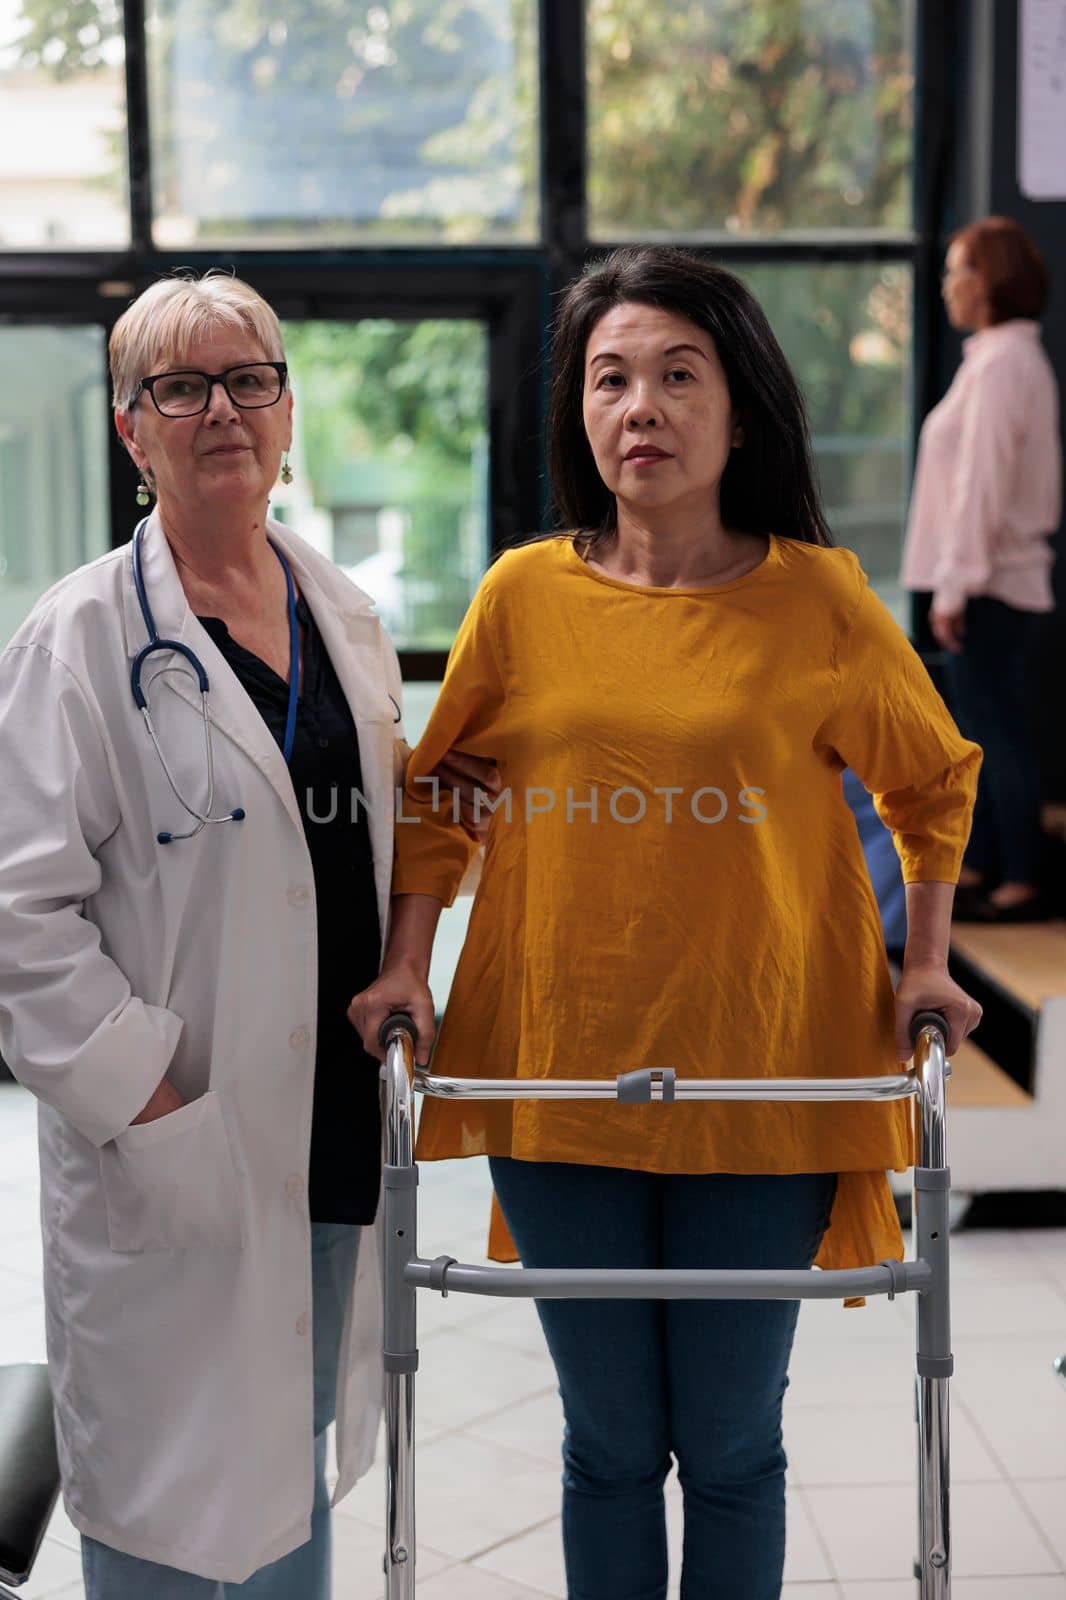 Portrait of medic doing physical therapy exam with asian patient, supporting with walking frame to recover after leg fracture injury. Injured woman attending medical physiotherapy consultation.